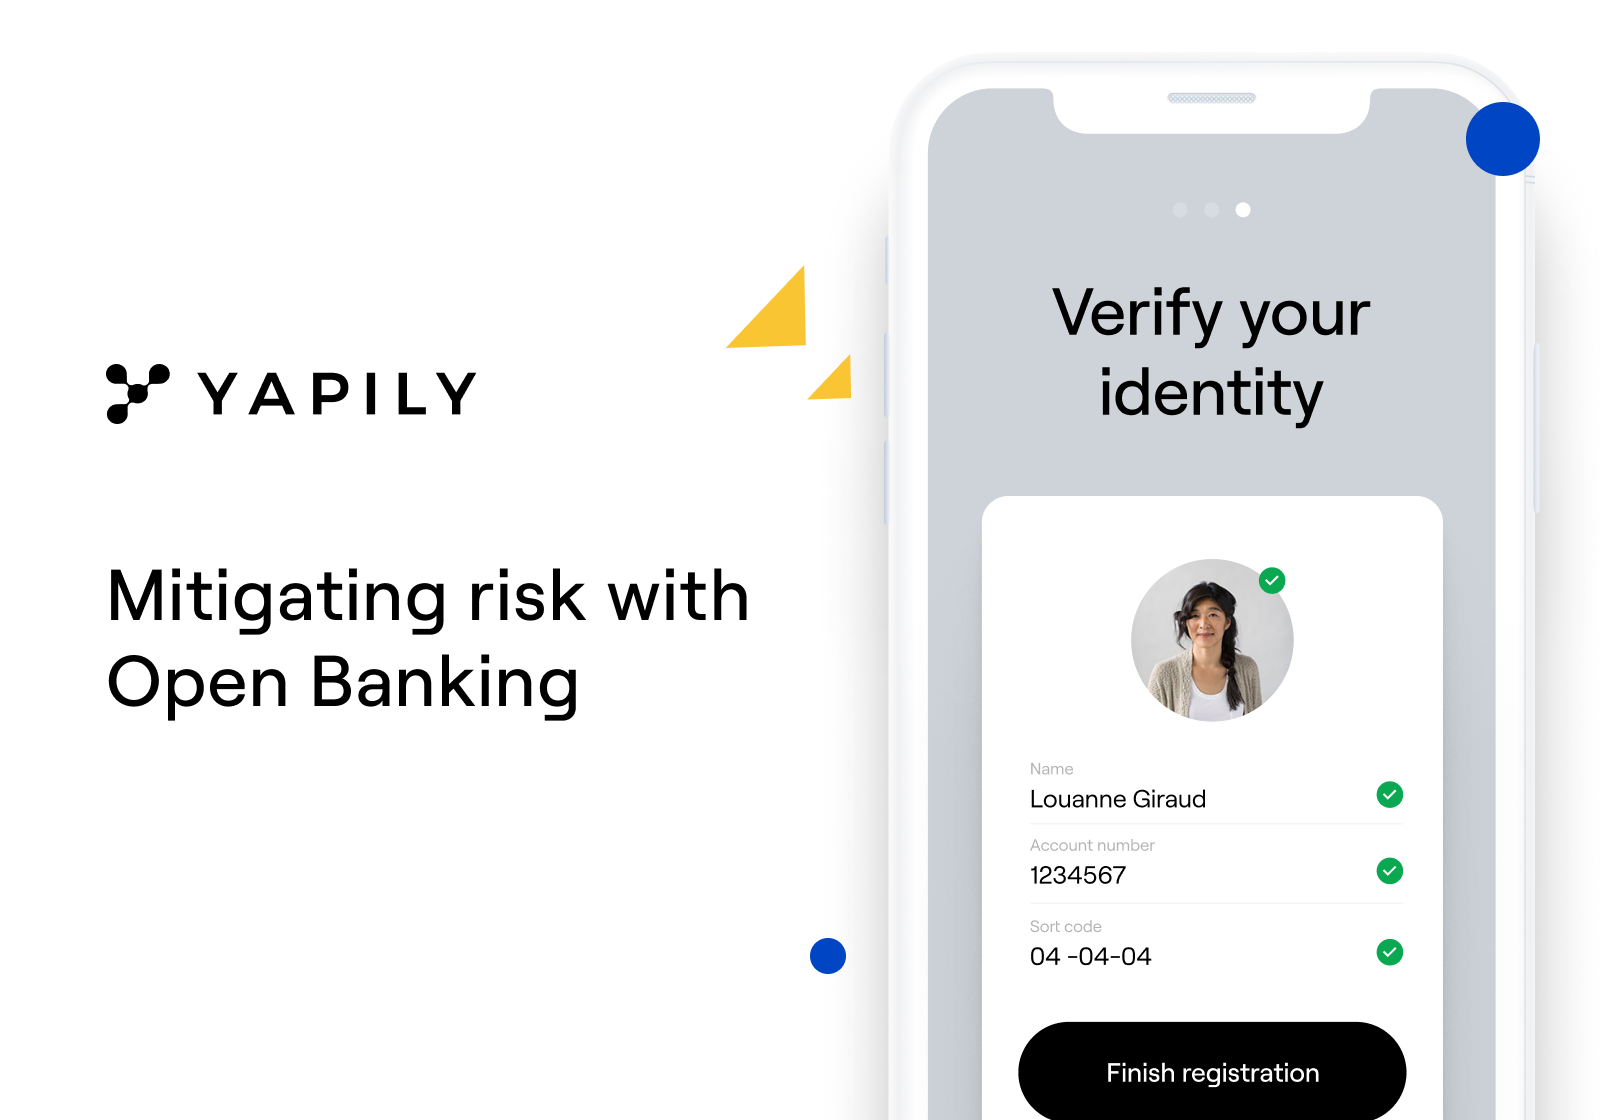 Open Banking can help reduce compliance costs by streamlining the onboarding process through leveraging the power of connectivity and offering a more data driven approach to managing risk, KYC and AML.